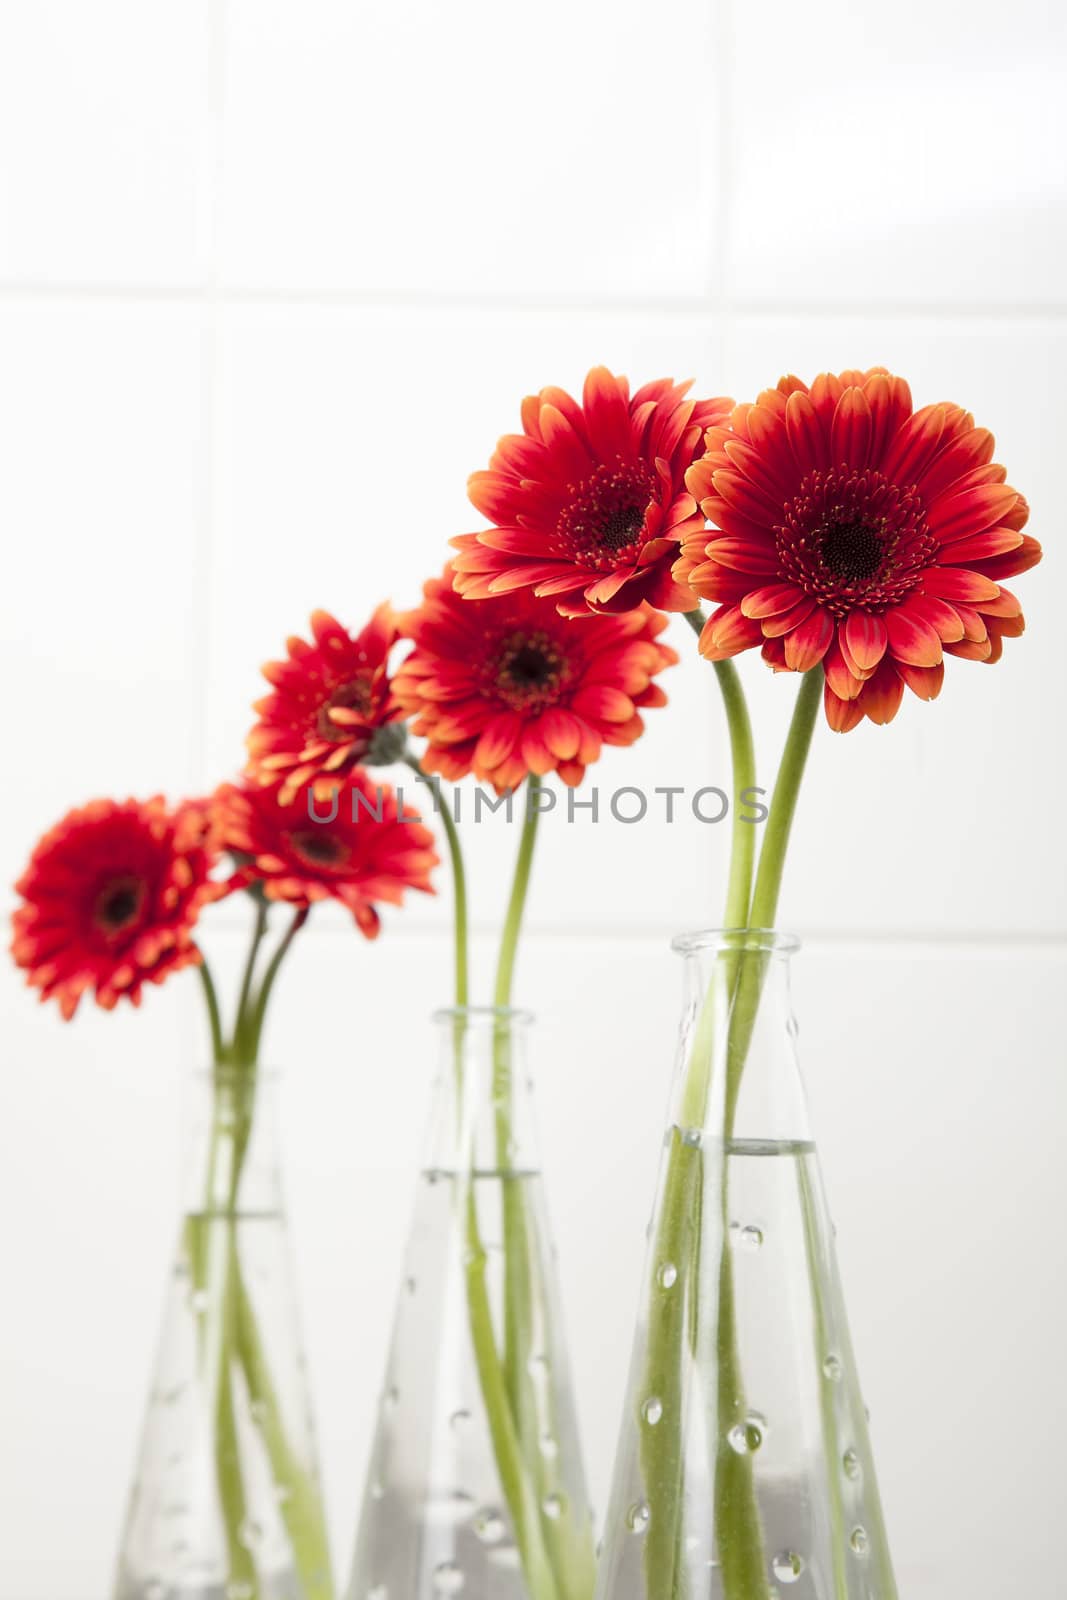 Four vases with red gerberas daisies.